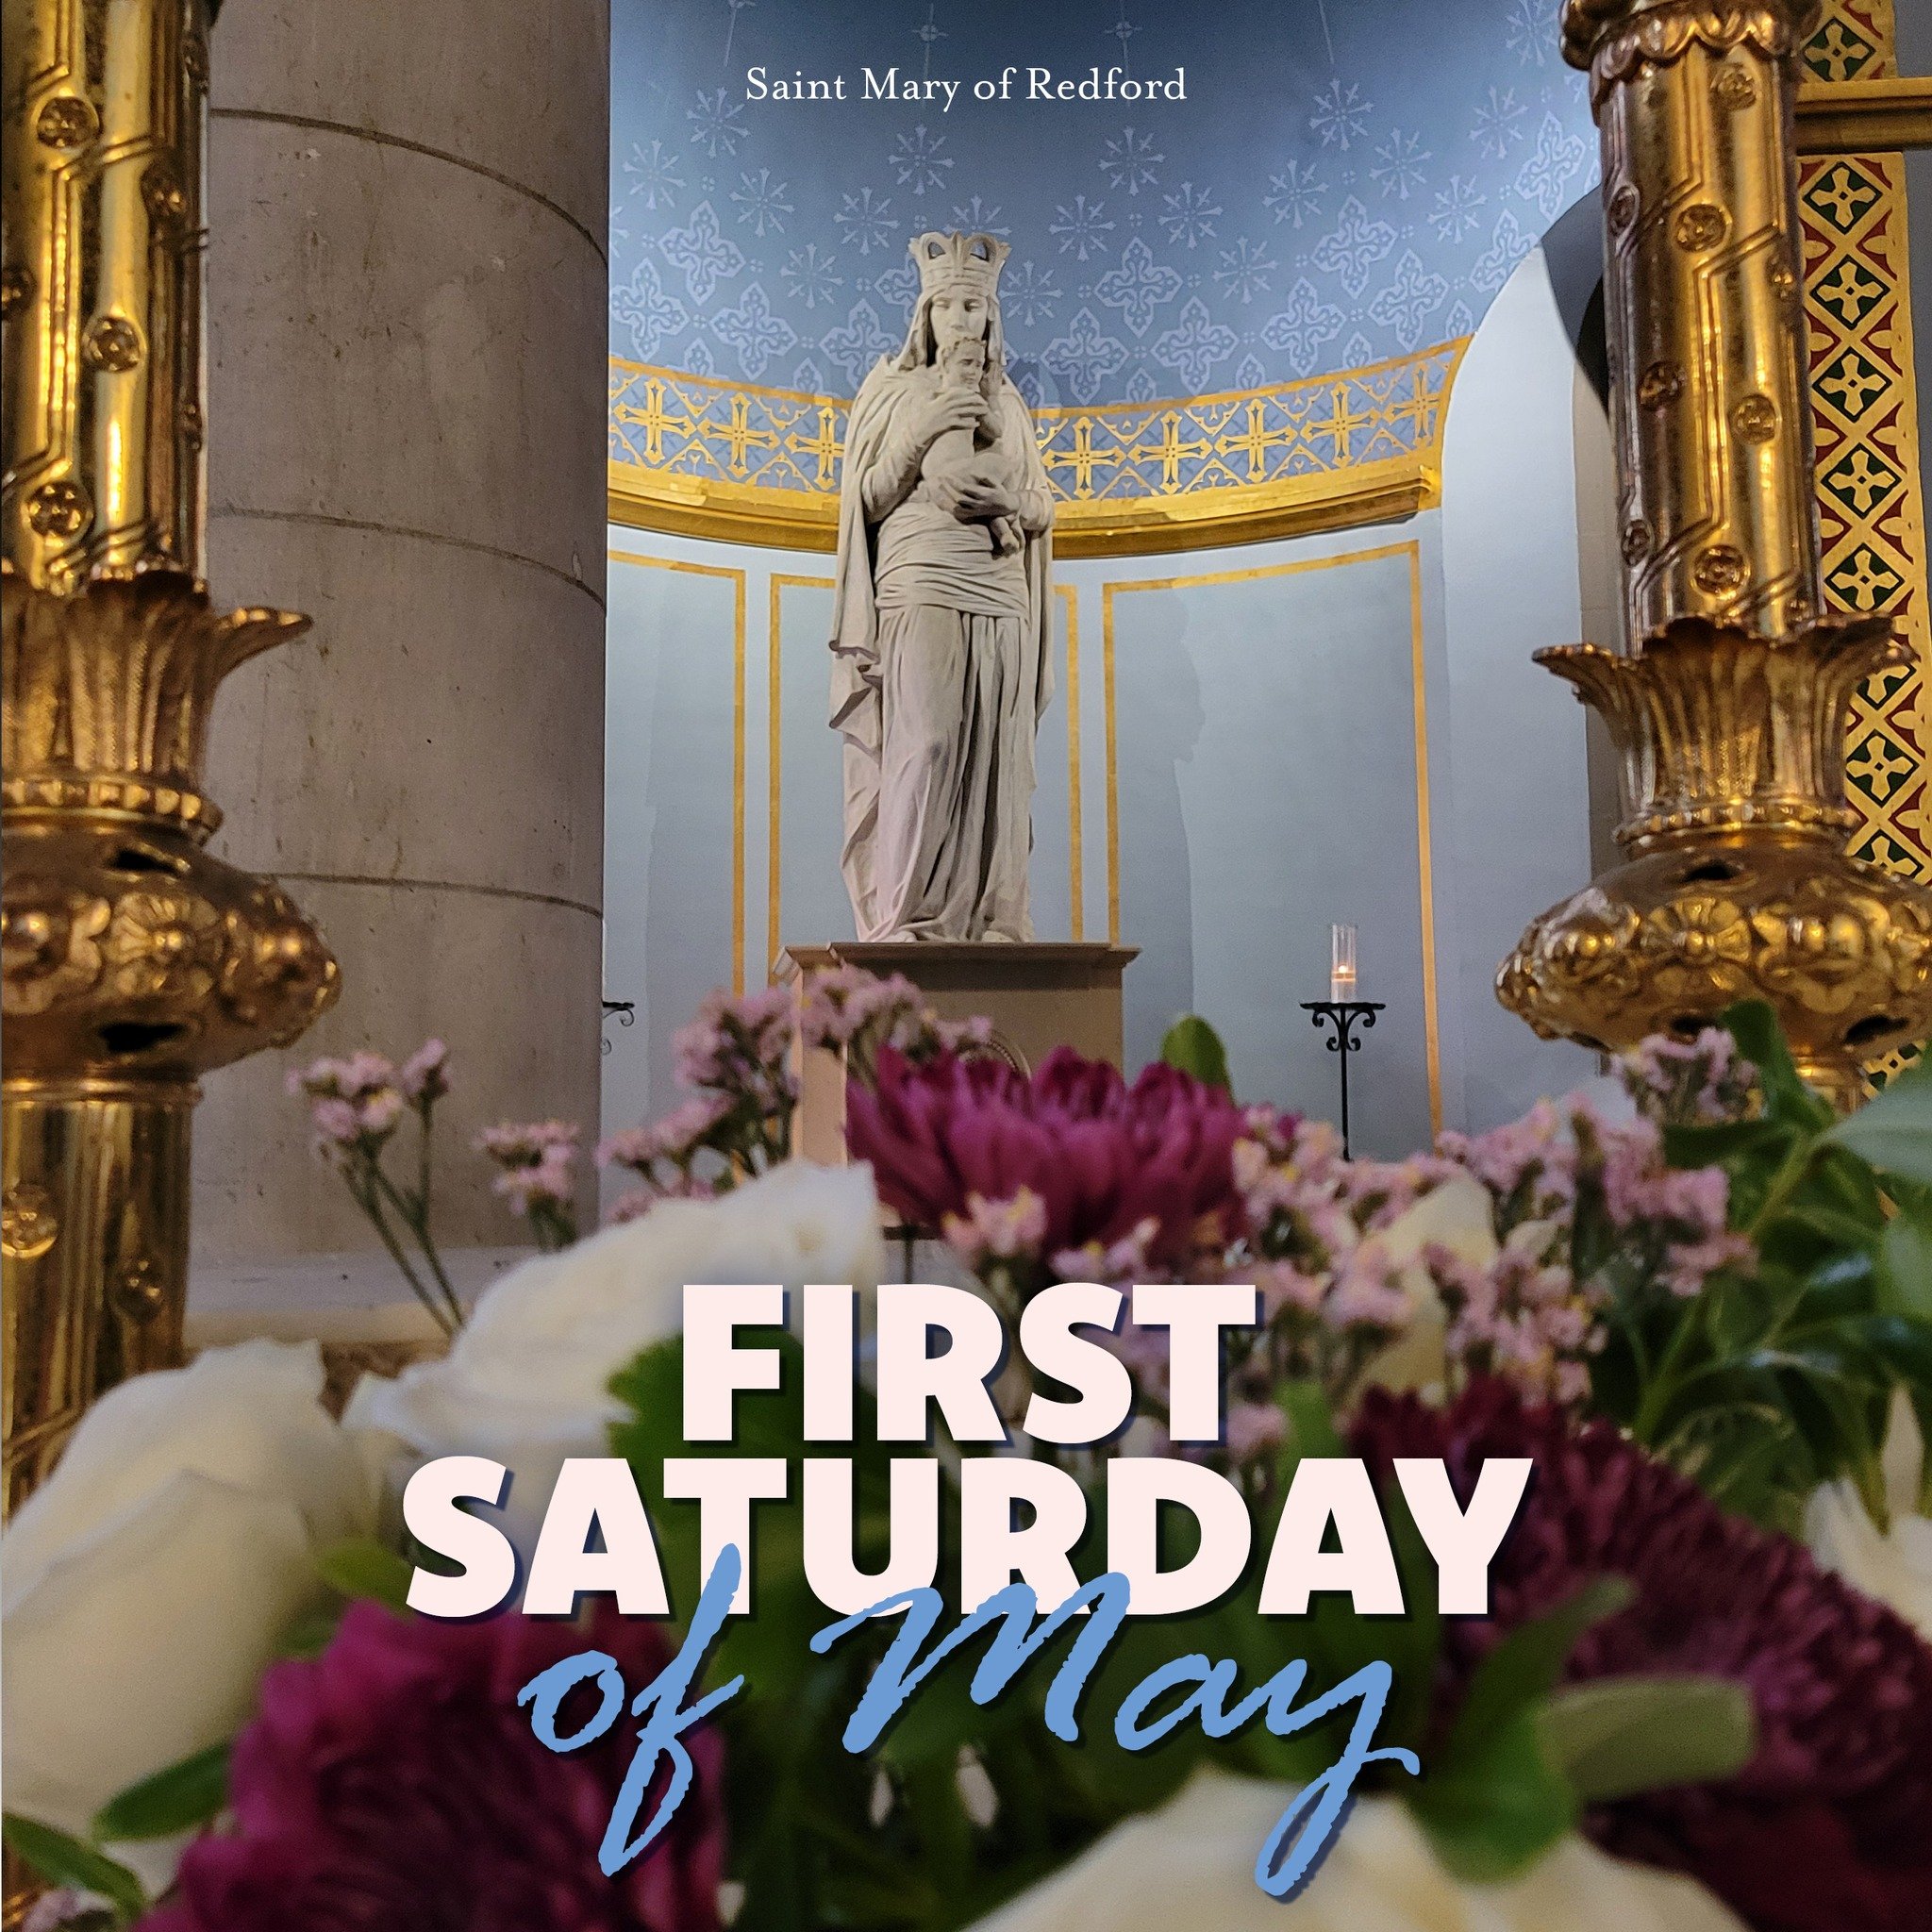 Tomorrow is the First Saturday of May! As Catholics, we set aside Saturdays to honor the Virgin Mary. In an even more special way, First Saturdays (as requested by Our Lady of Fatima) through the 'First Saturday Devotion.' In yet another way, the mon